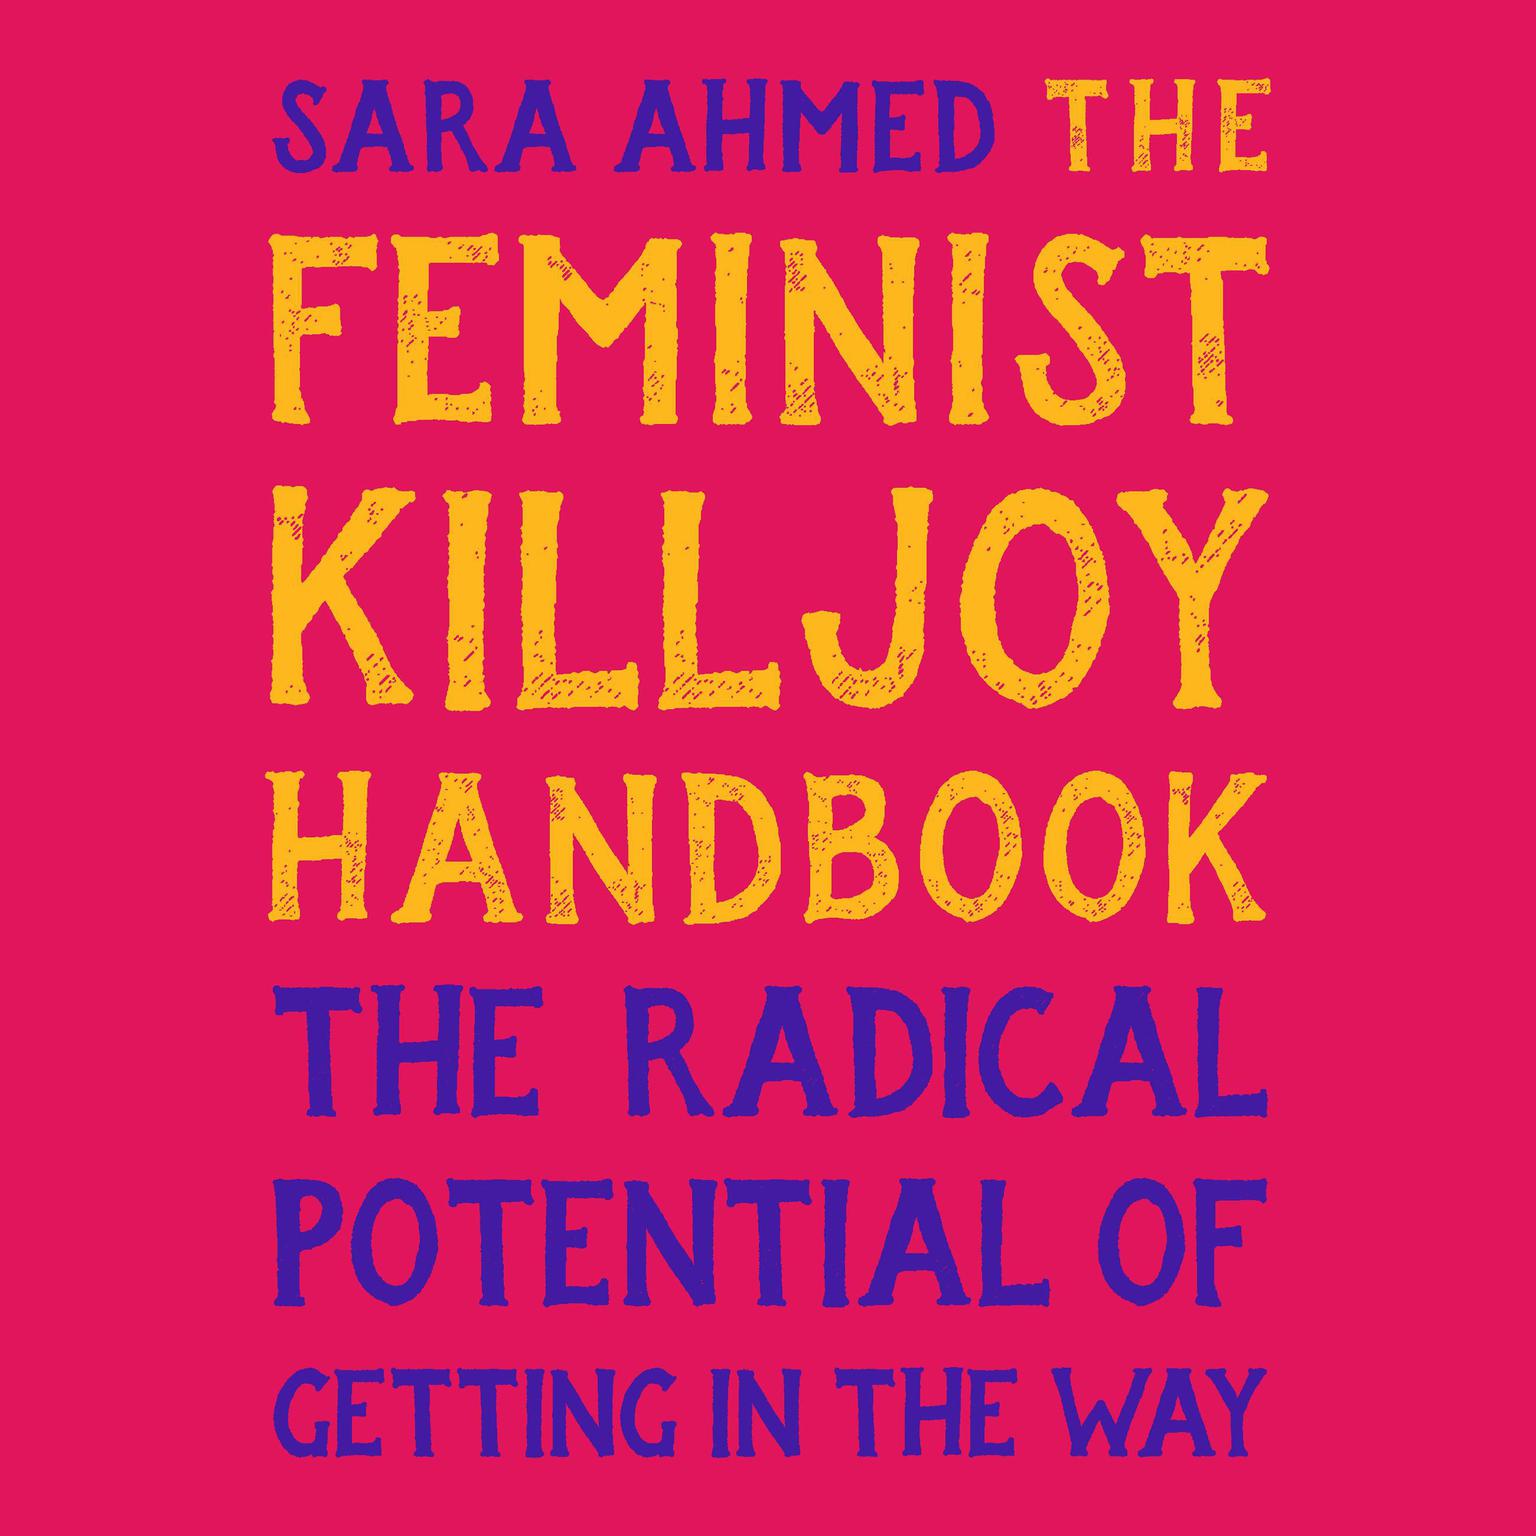 The Feminist Killjoy Handbook: The Radical Potential of Getting in the Way Audiobook, by Sara Ahmed